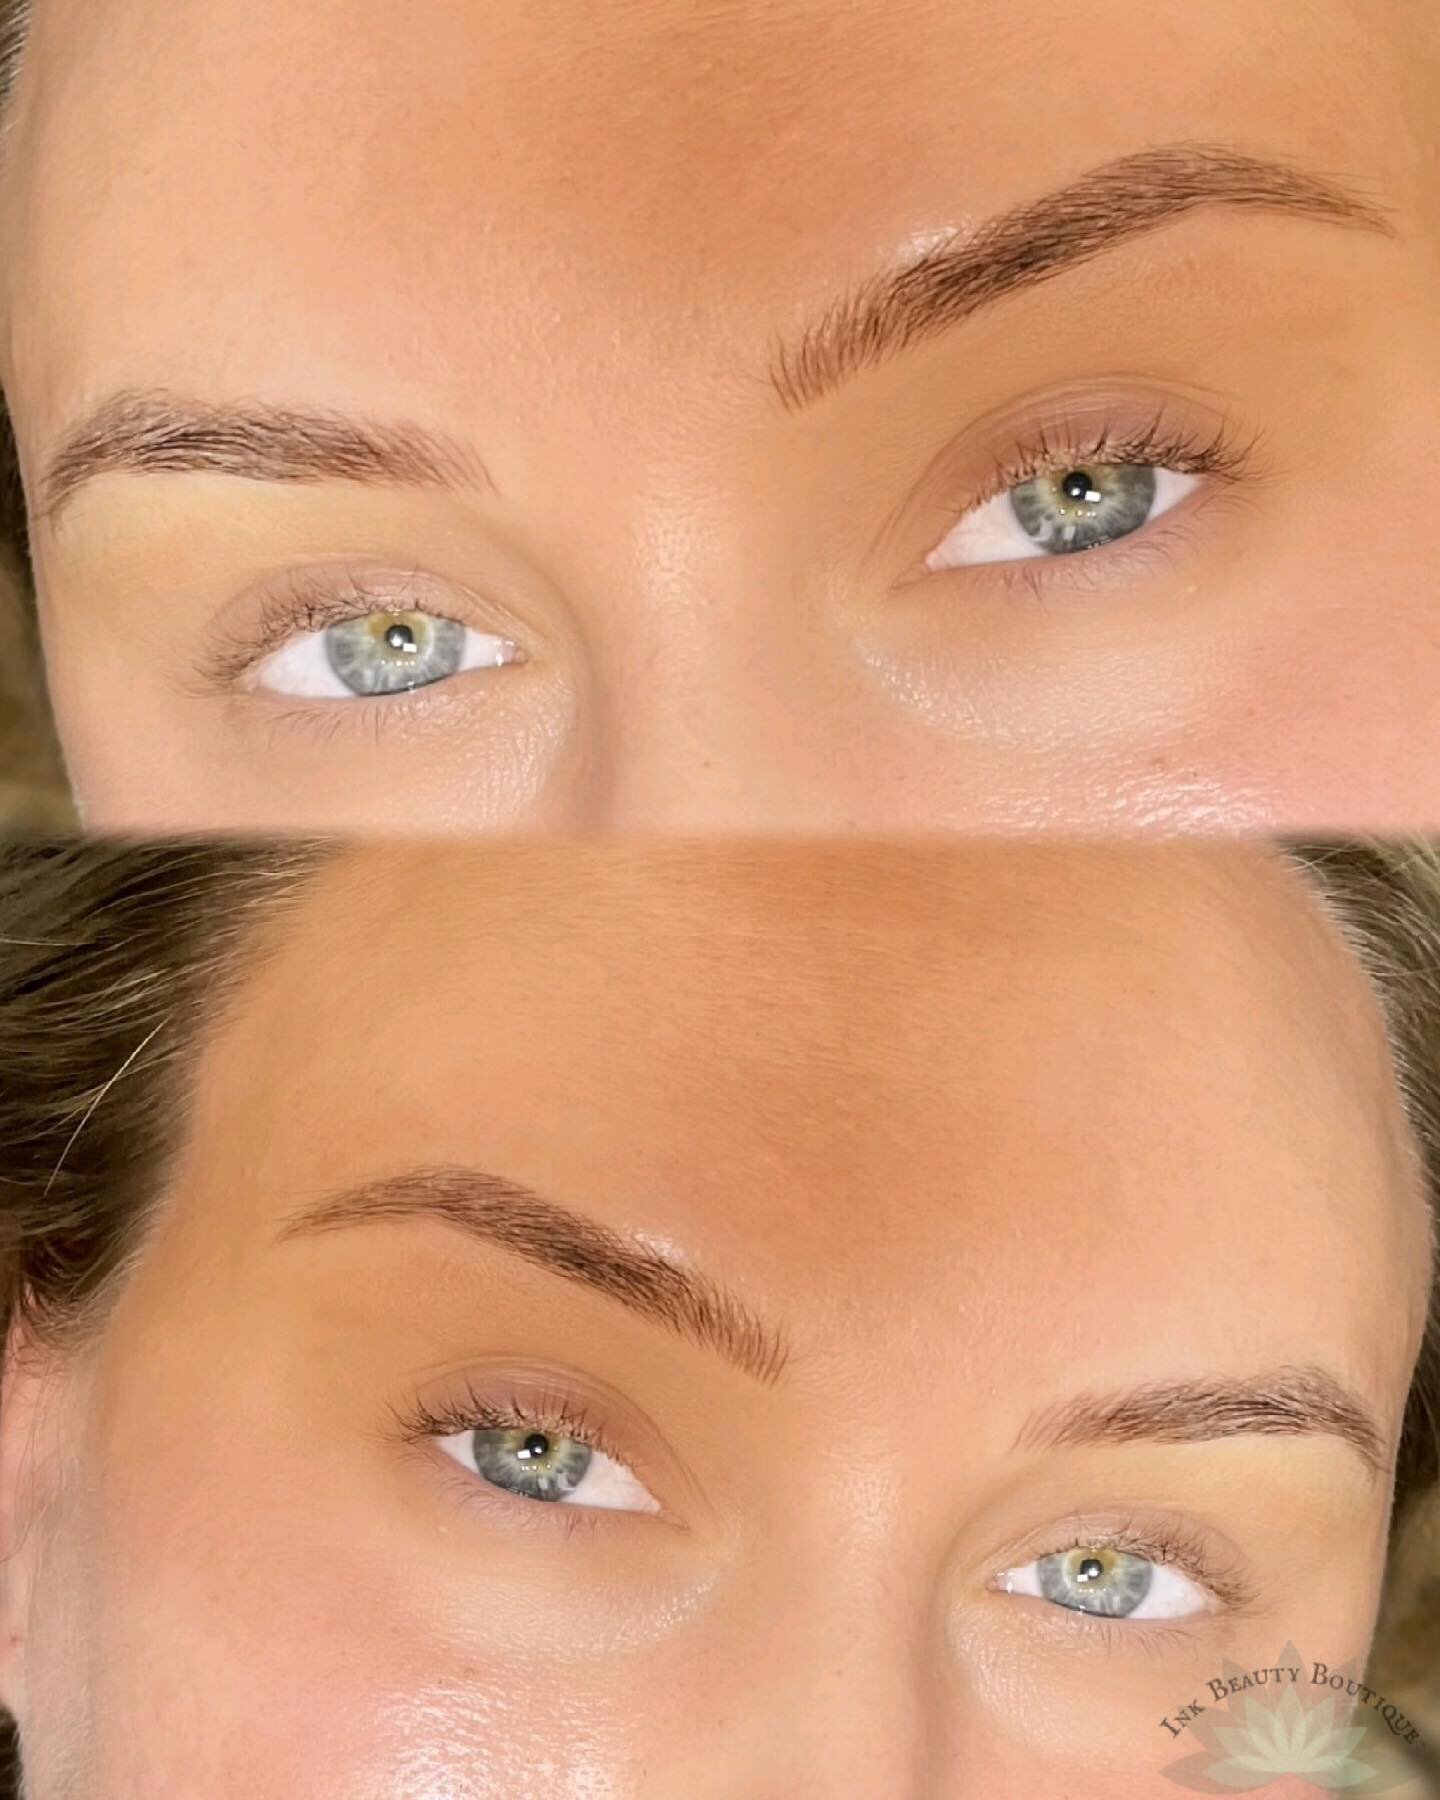 Combos on my beautiful client 😍

You can book with me by clicking book now in my bio 🗓 I&rsquo;m here for you, DM or email me if you have any questions 😘

#portlandoregonbrows #pdxpermanentmakeup #pdxpmu #microbladedbrows #beauty #tattooedbrows #t